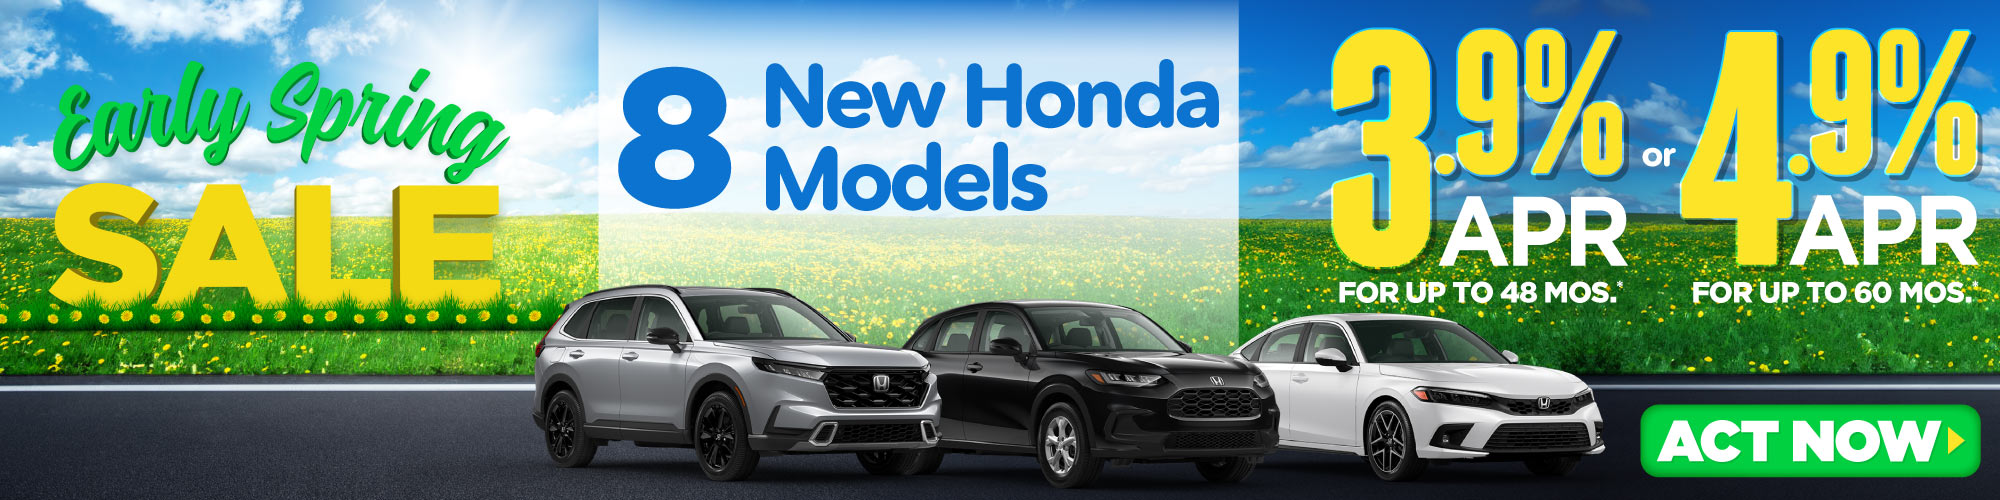 New 2022 Honda Pilot or Ridgeline | As Low as 1.9% APR for up to 48 mos* | Act Now